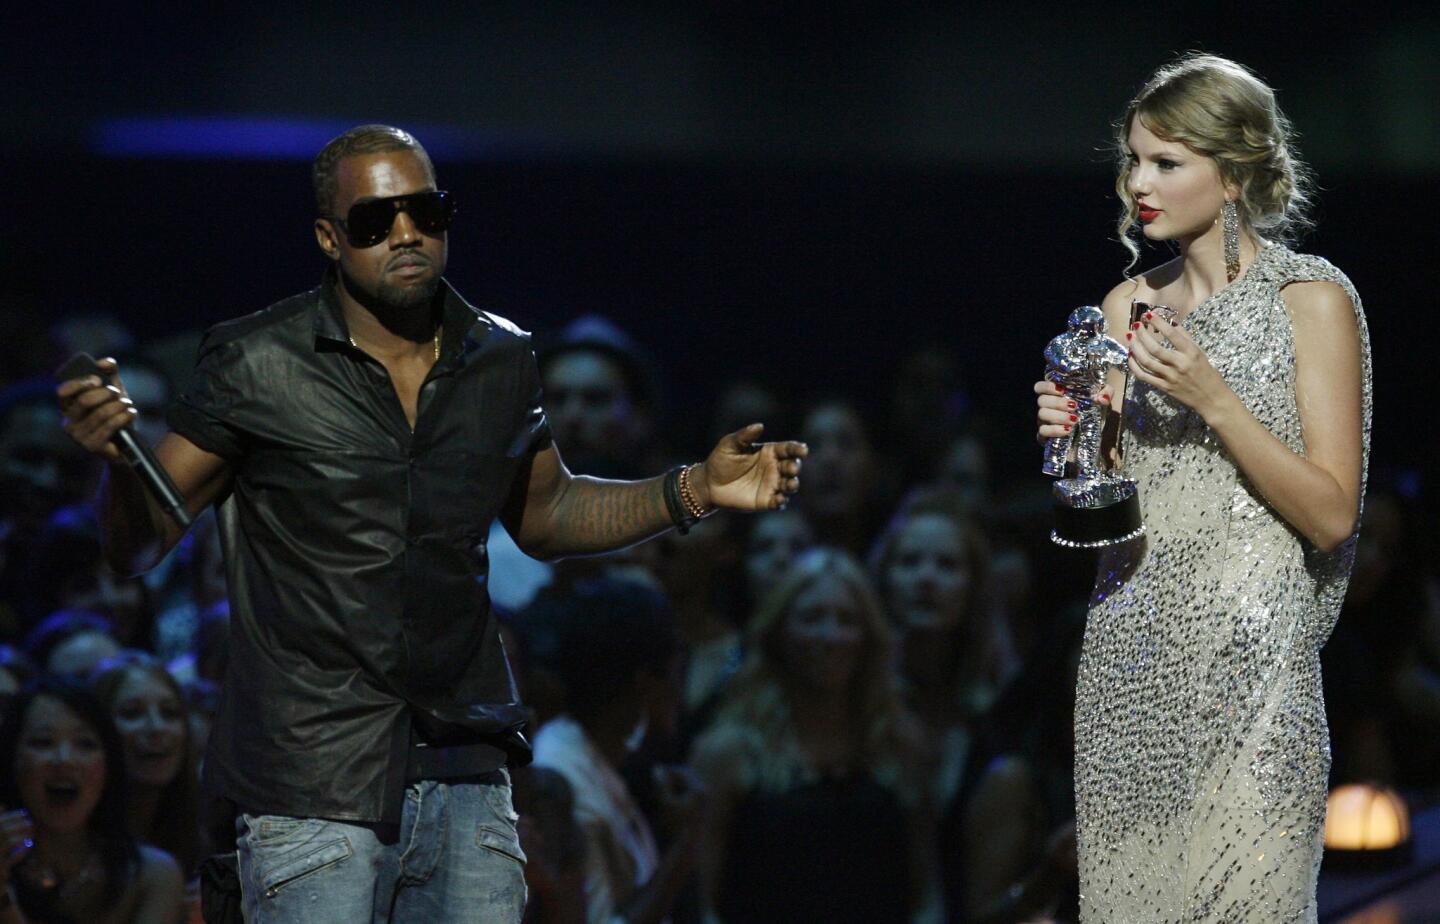 2009 | Kanye West had his say at the Video Music Awards